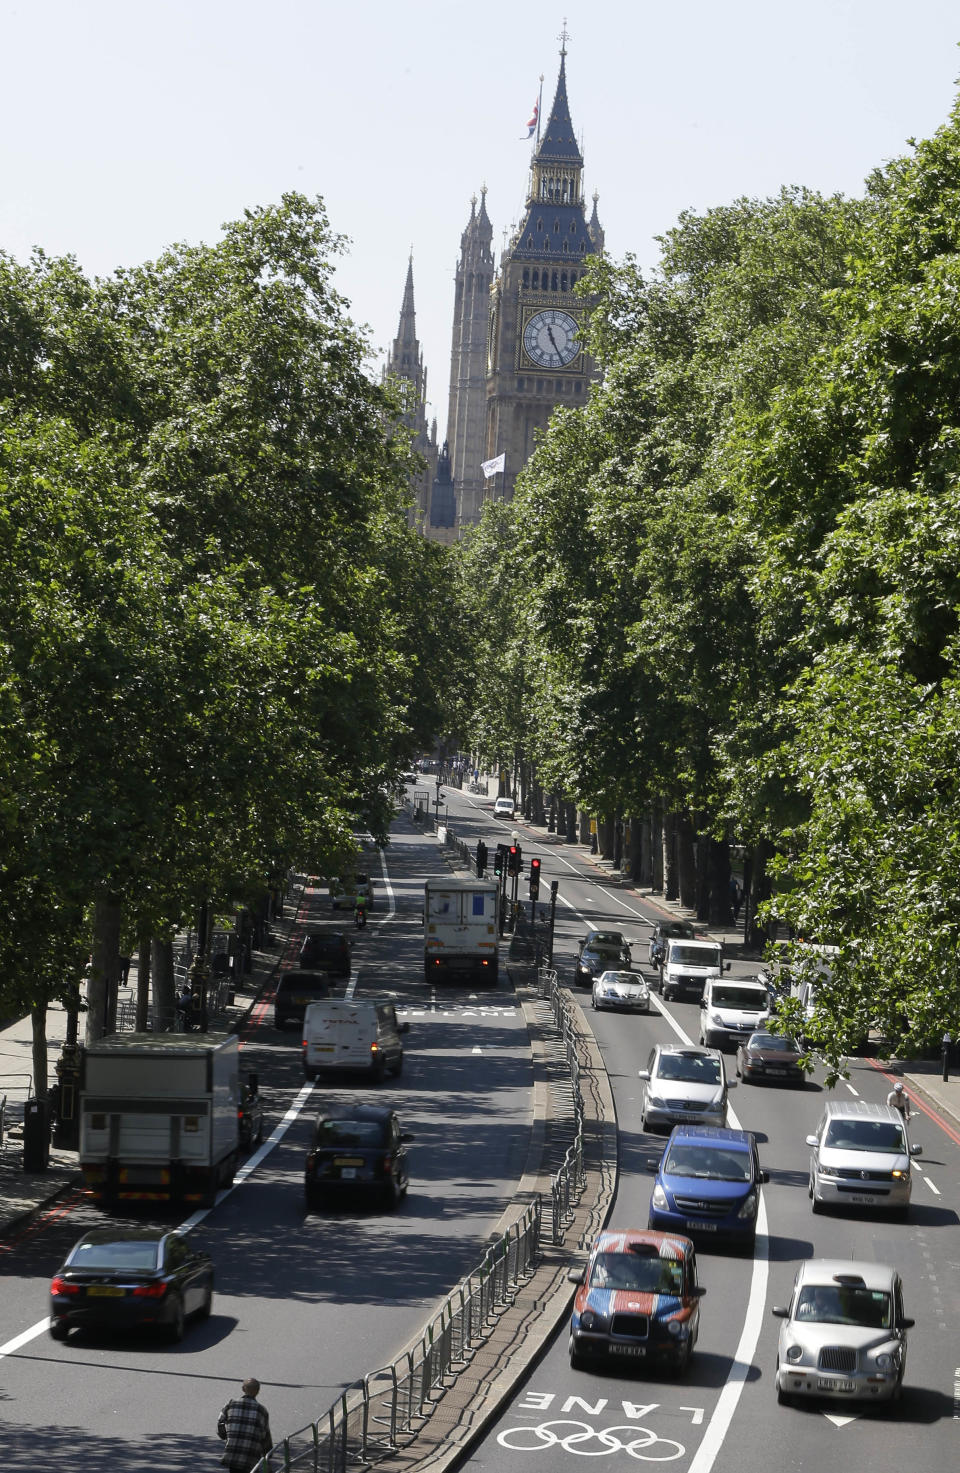 Traffic drives along Olympic Lanes on Embankment in central London, Monday, July 23, 2012. The Olympic road lanes will come into effect on Wednesday, July 25, two days before the Opening Ceremony of the 2012 Summer Olympics. Only accredited vehicles will be allowed to use them. London's traditional Black Cabs will not be allowed in them. (AP Photo/Kirsty Wigglesworth)